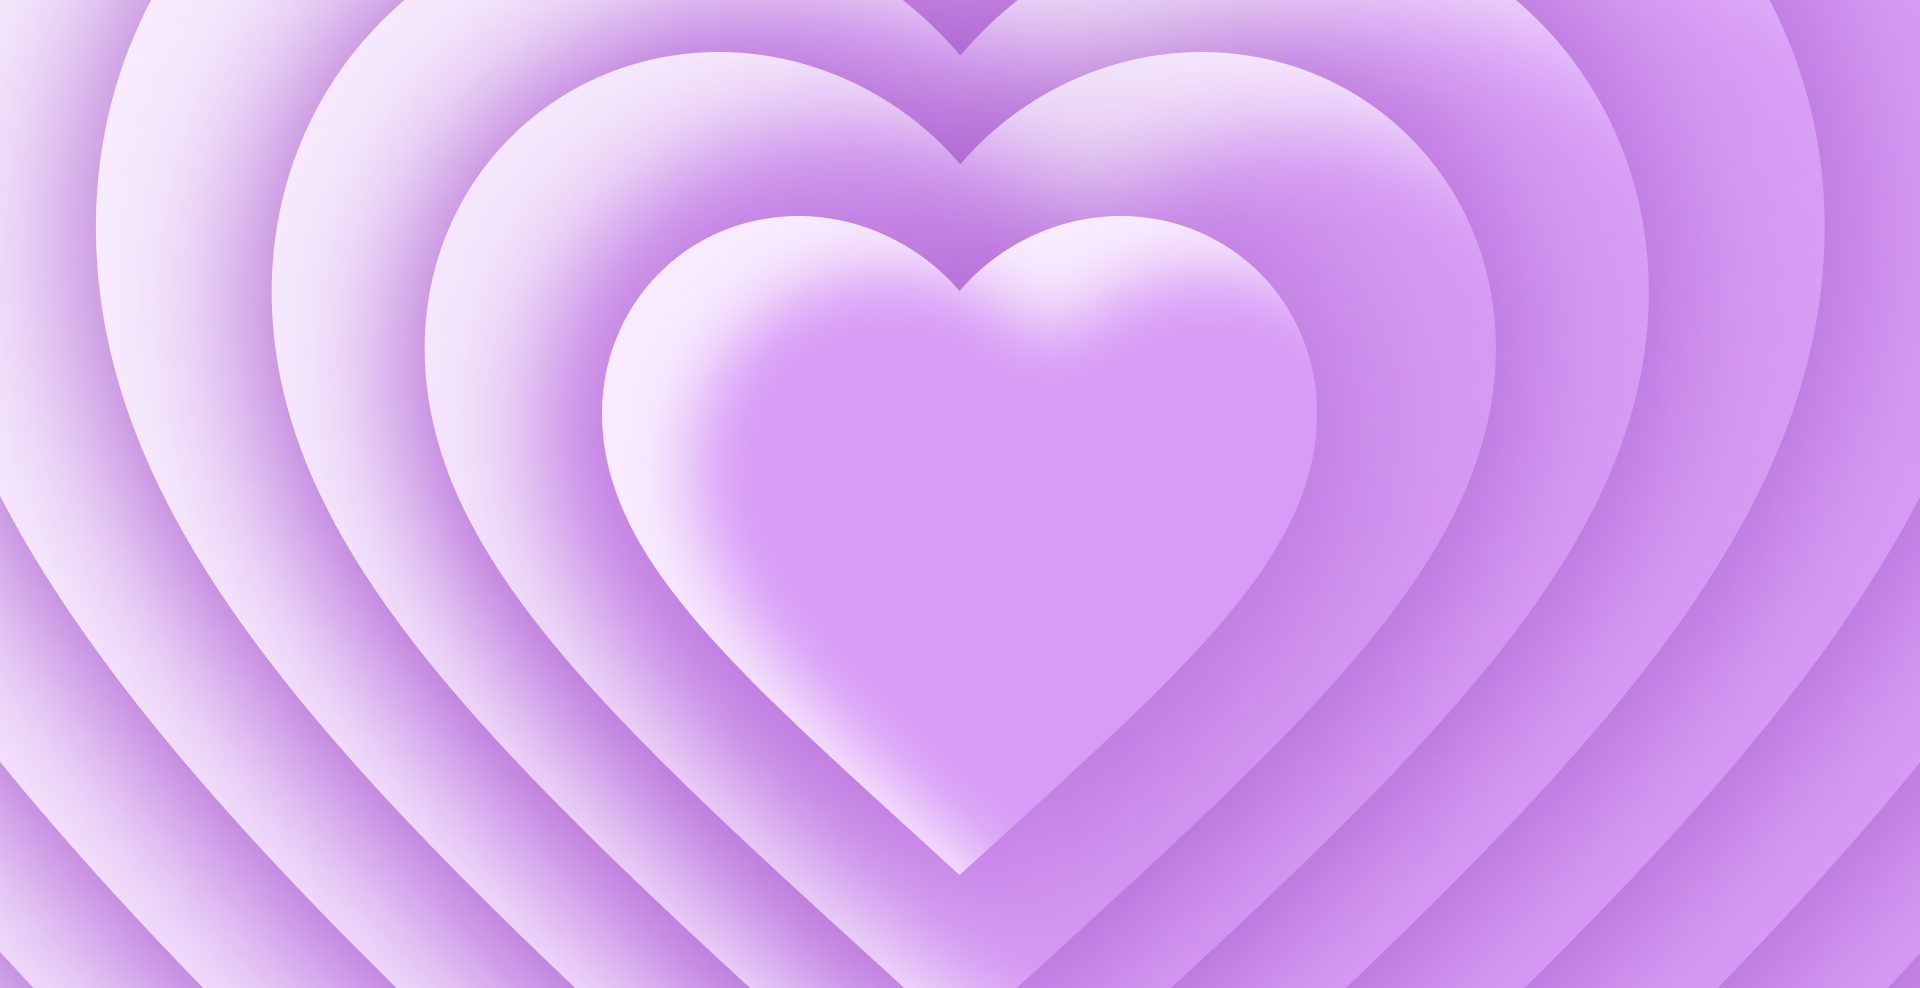 Series of purple hearts on top of each other